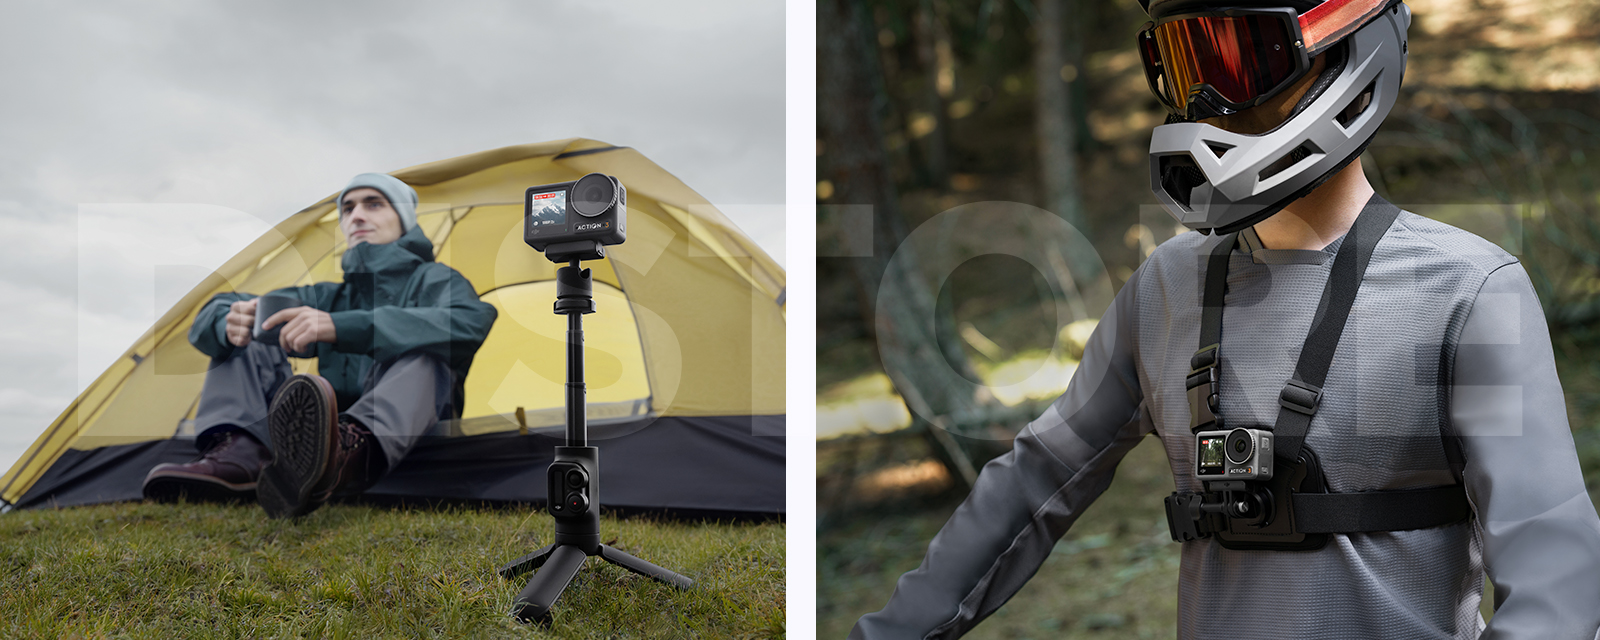 Is the DJI Osmo Action 3 Adventure Combo Worth It? | D1 Lounge